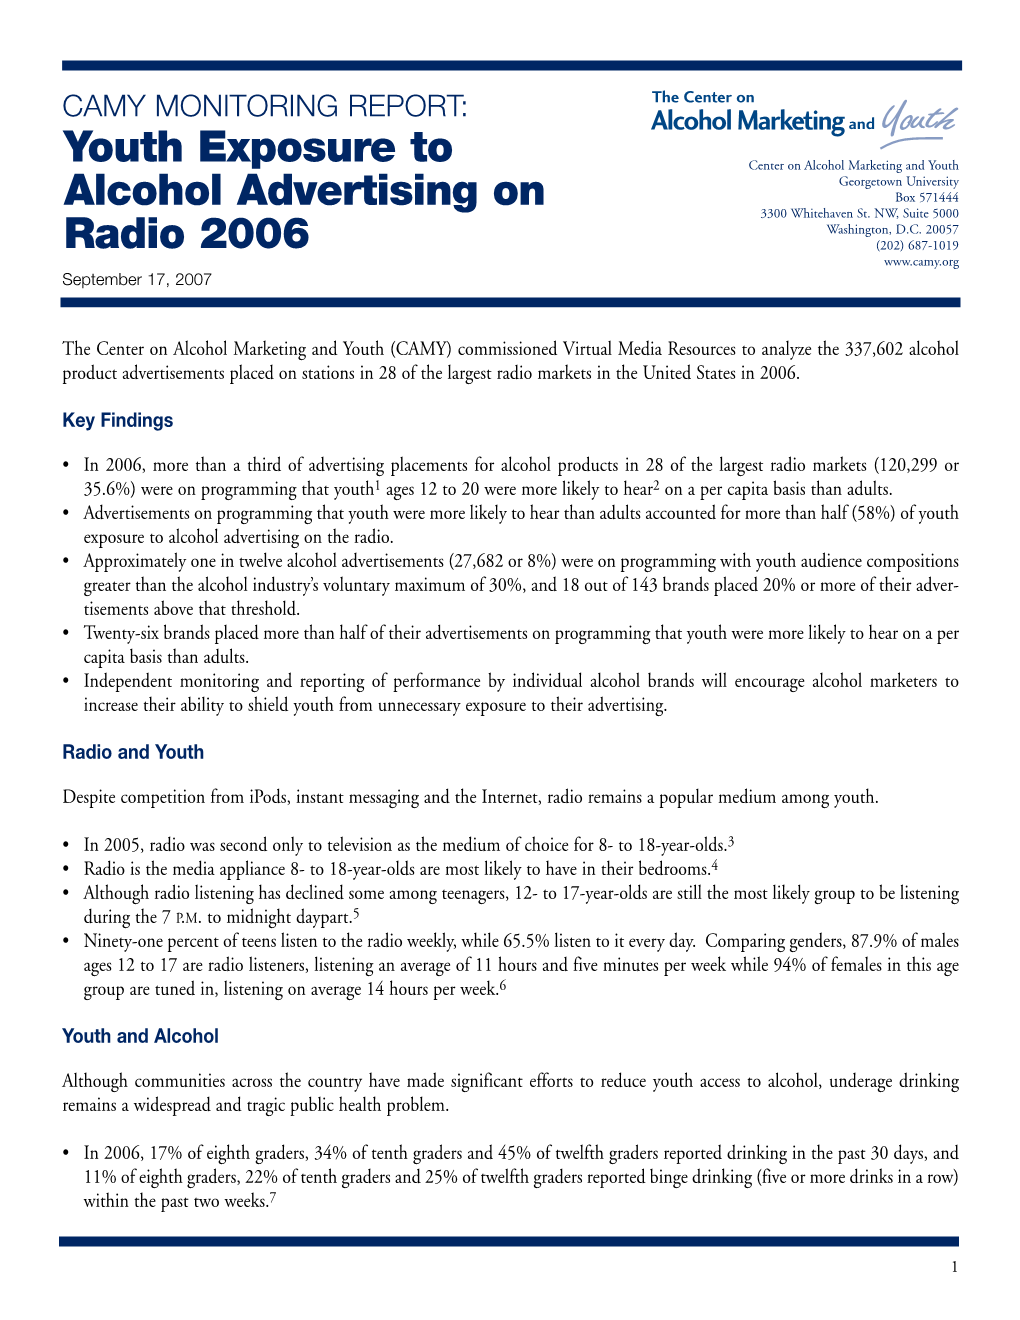 Youth Exposure to Alcohol Advertising on Radio 2006